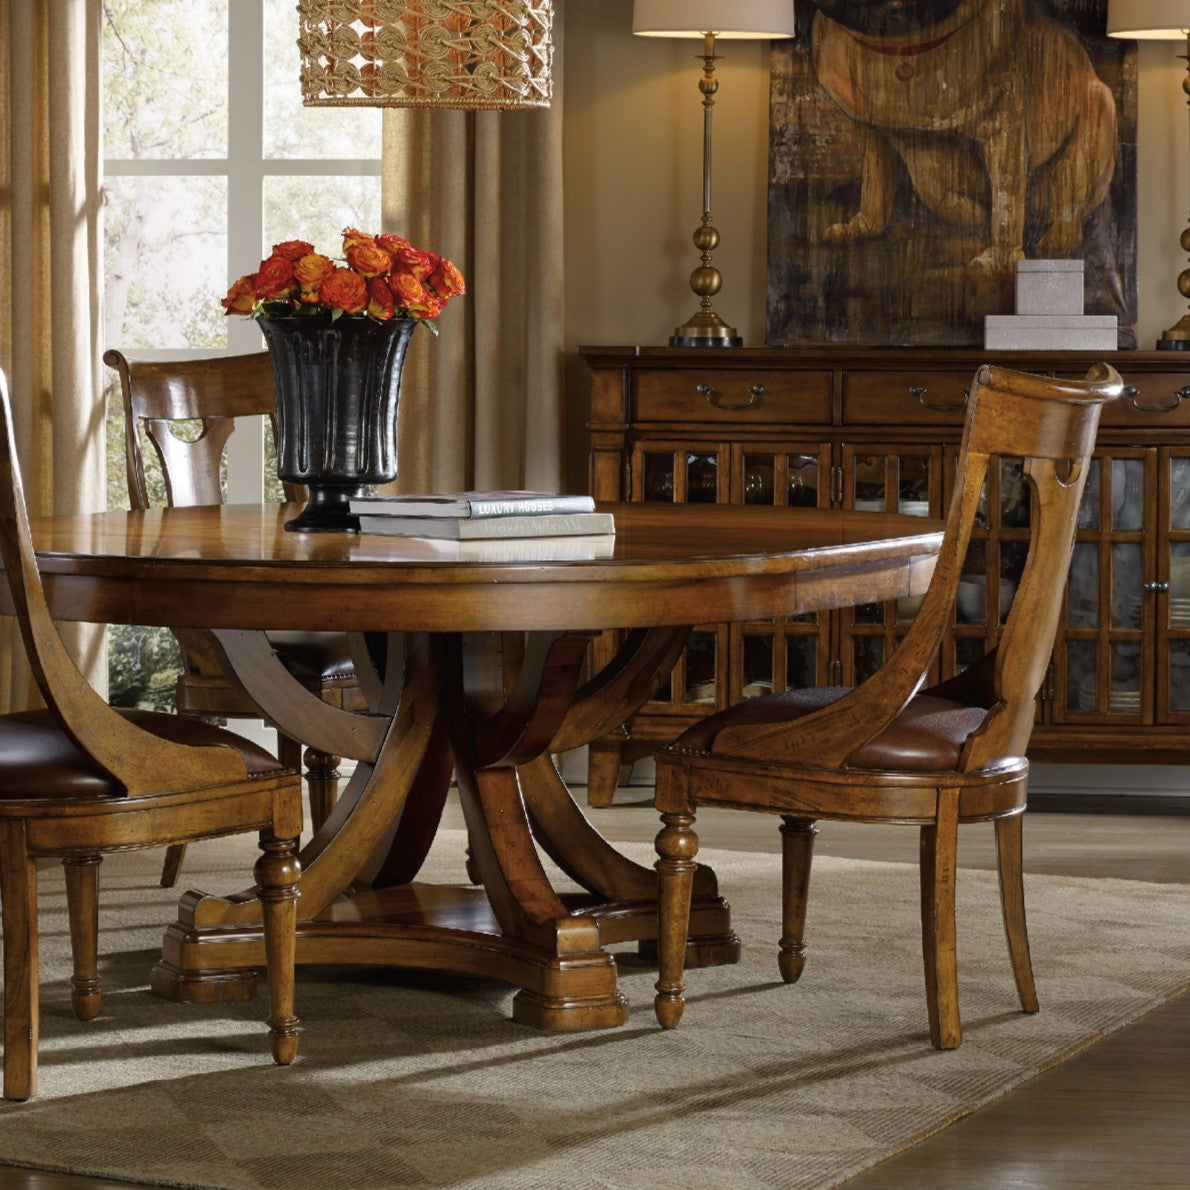 Hooker Furniture Tynecastle Collection dining table and dining chairs